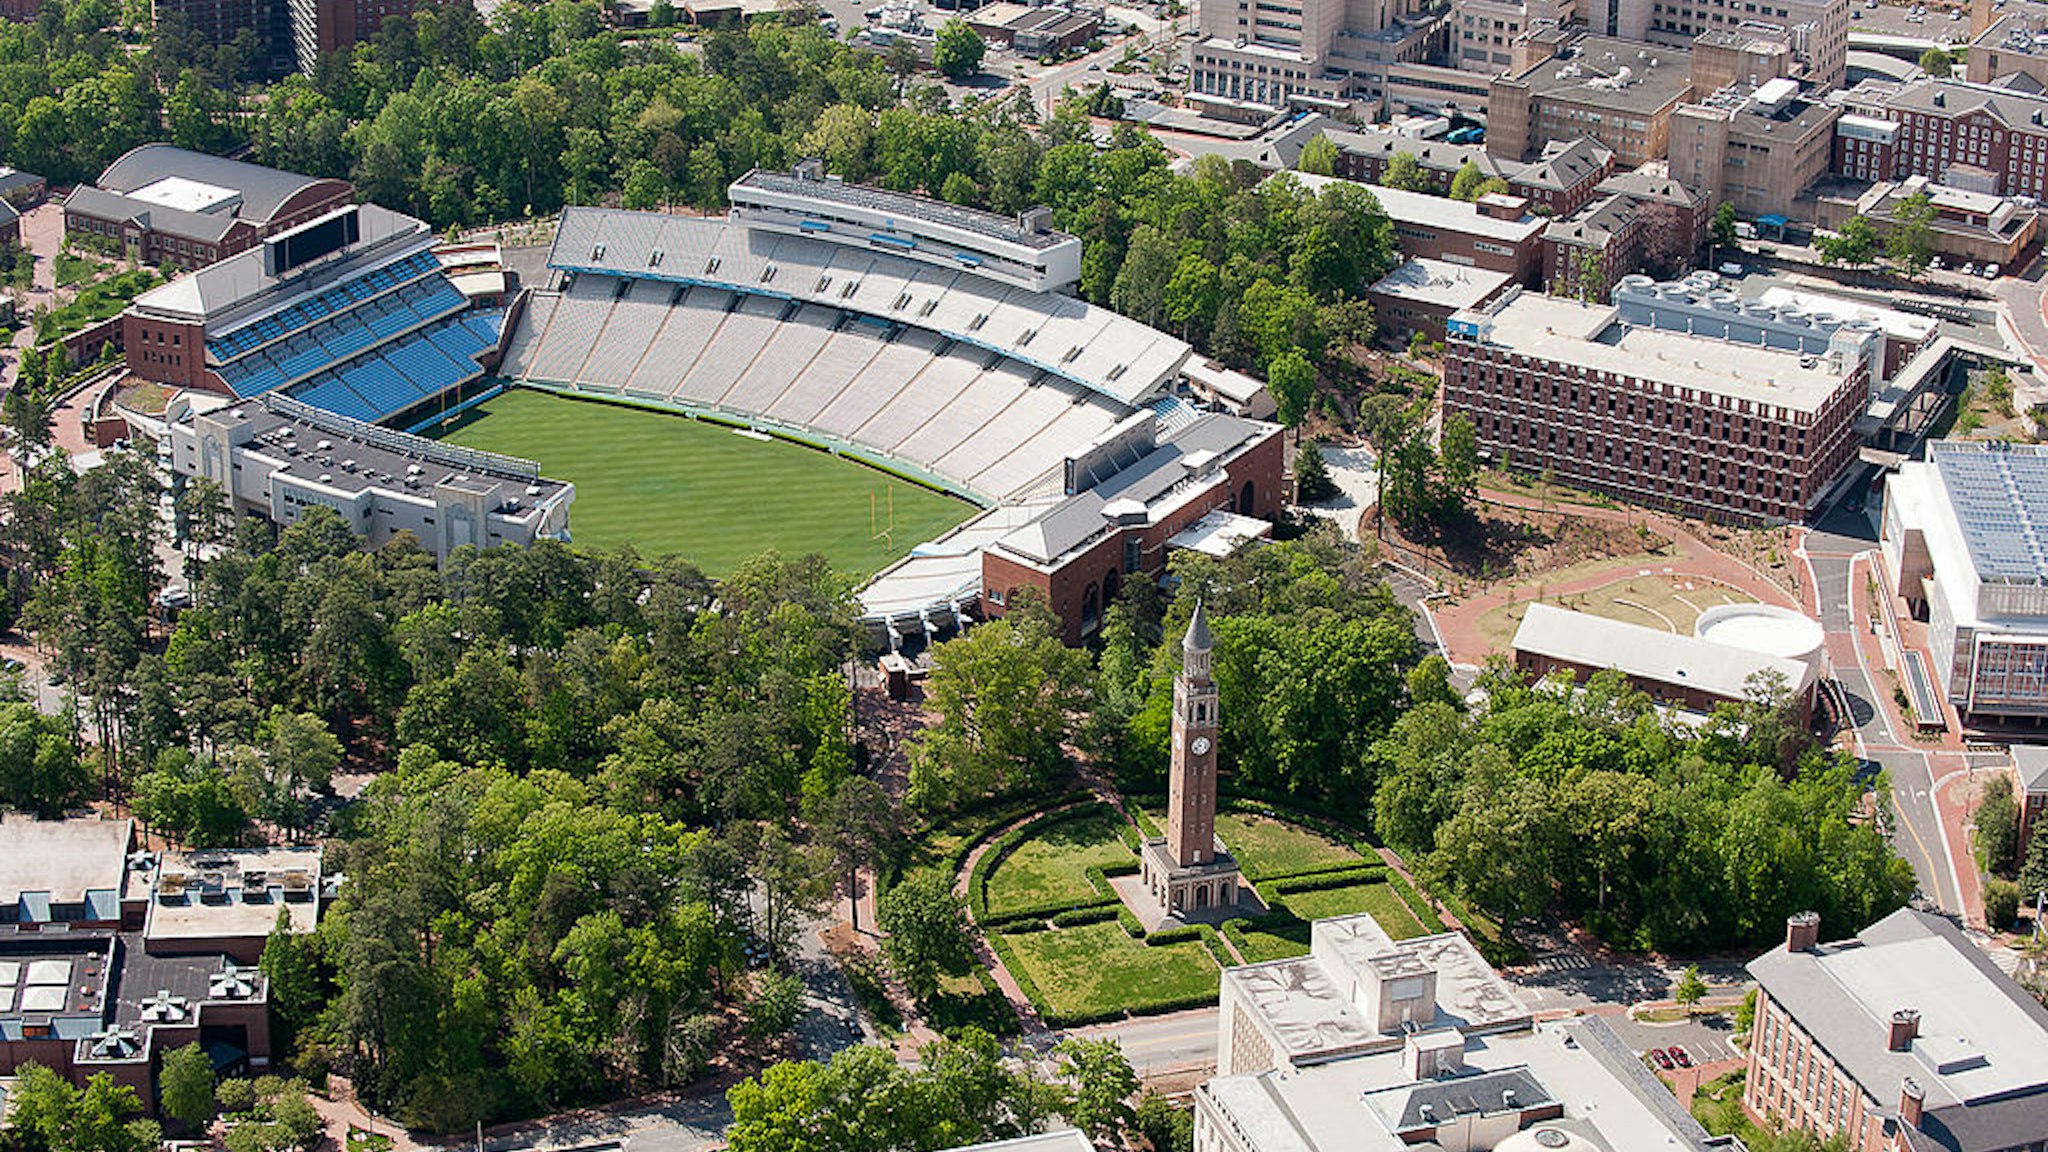 CHAPEL HILL, NC - APRIL 21: An aerial view of the University of North Carolina campus including Kenan Stadium (left) and the Morehead-Patterson Bell Tower (center) on April 21, 2013 in Chapel Hill, North Carolina. (Photo by Lance King/Getty Images)